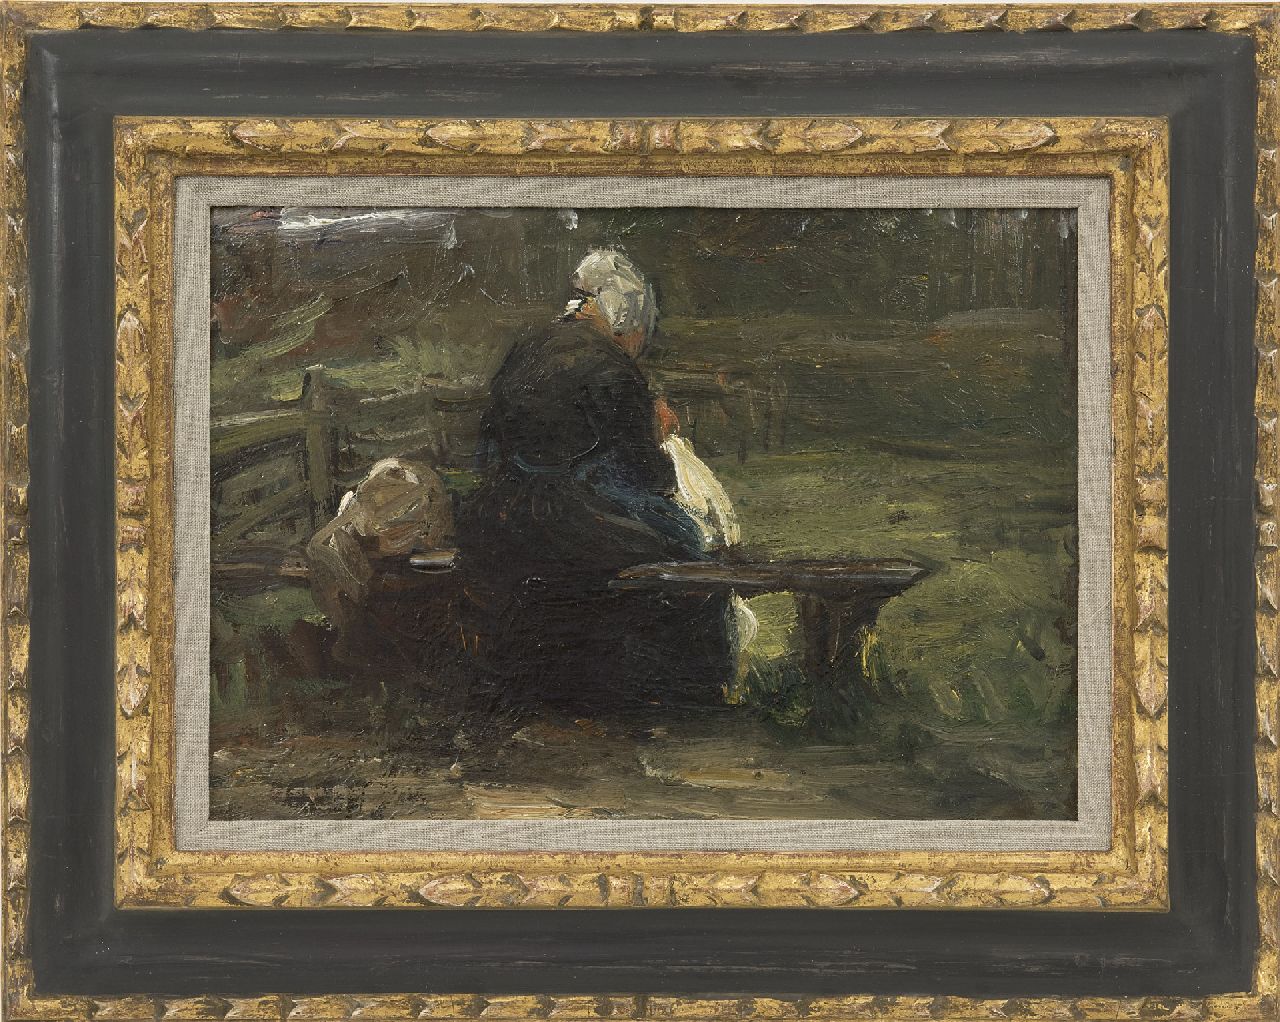 Blommers B.J.  | Bernardus Johannes Blommers | Paintings offered for sale | A fisherman's wife on a bench, oil on canvas 25.0 x 35.1 cm, gesigneerd met verso atelierstempel